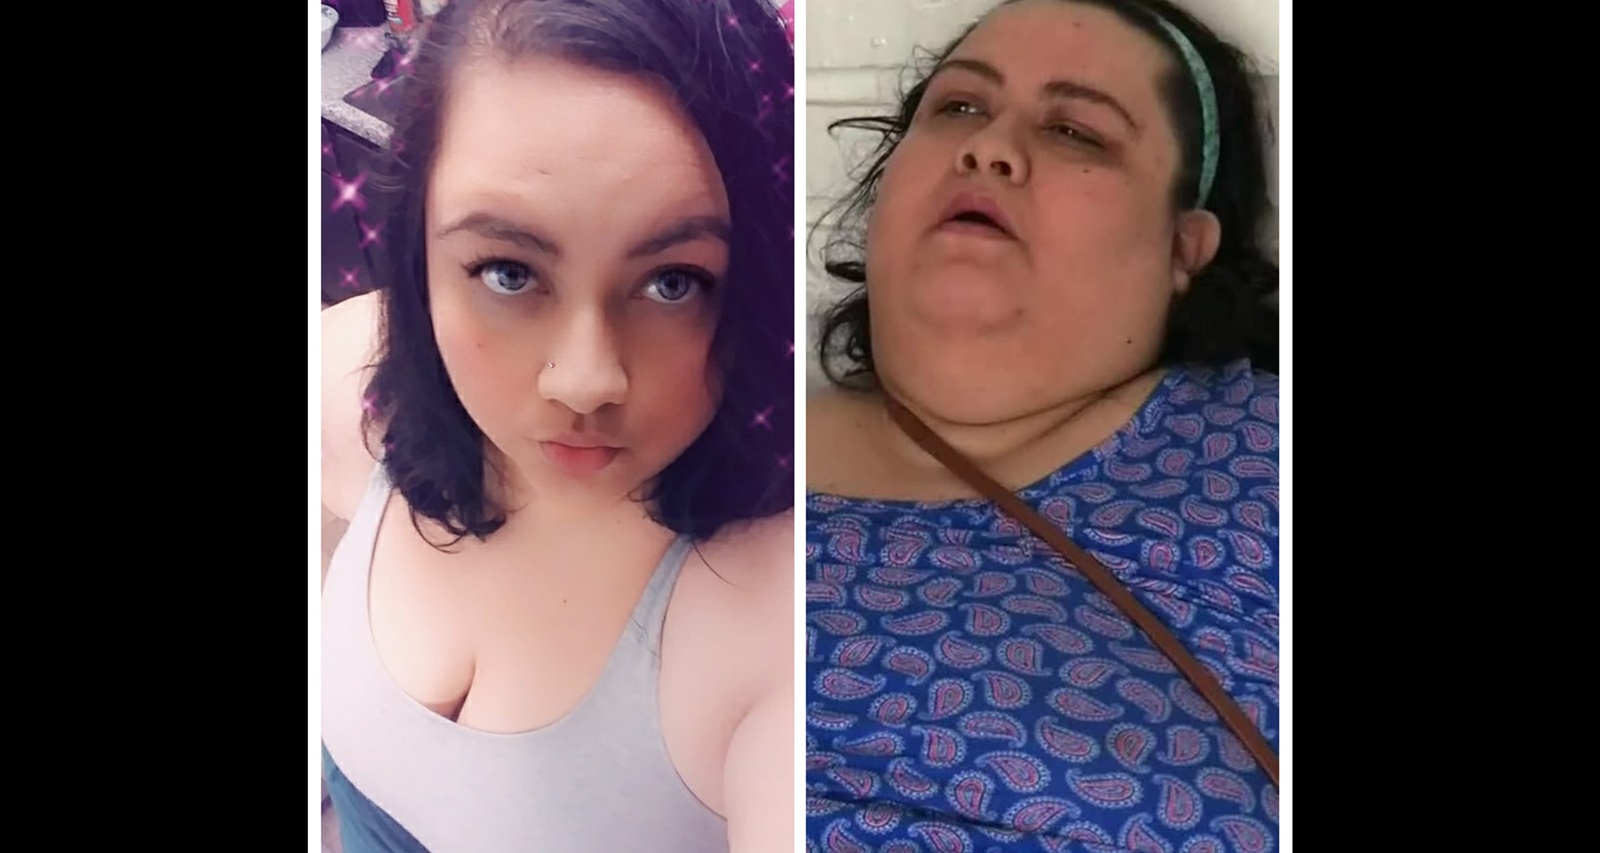 “My 600-lb Life” Update: What Happened to Annjeannette Whaley and Vianey & Allen? Where Are They Now?